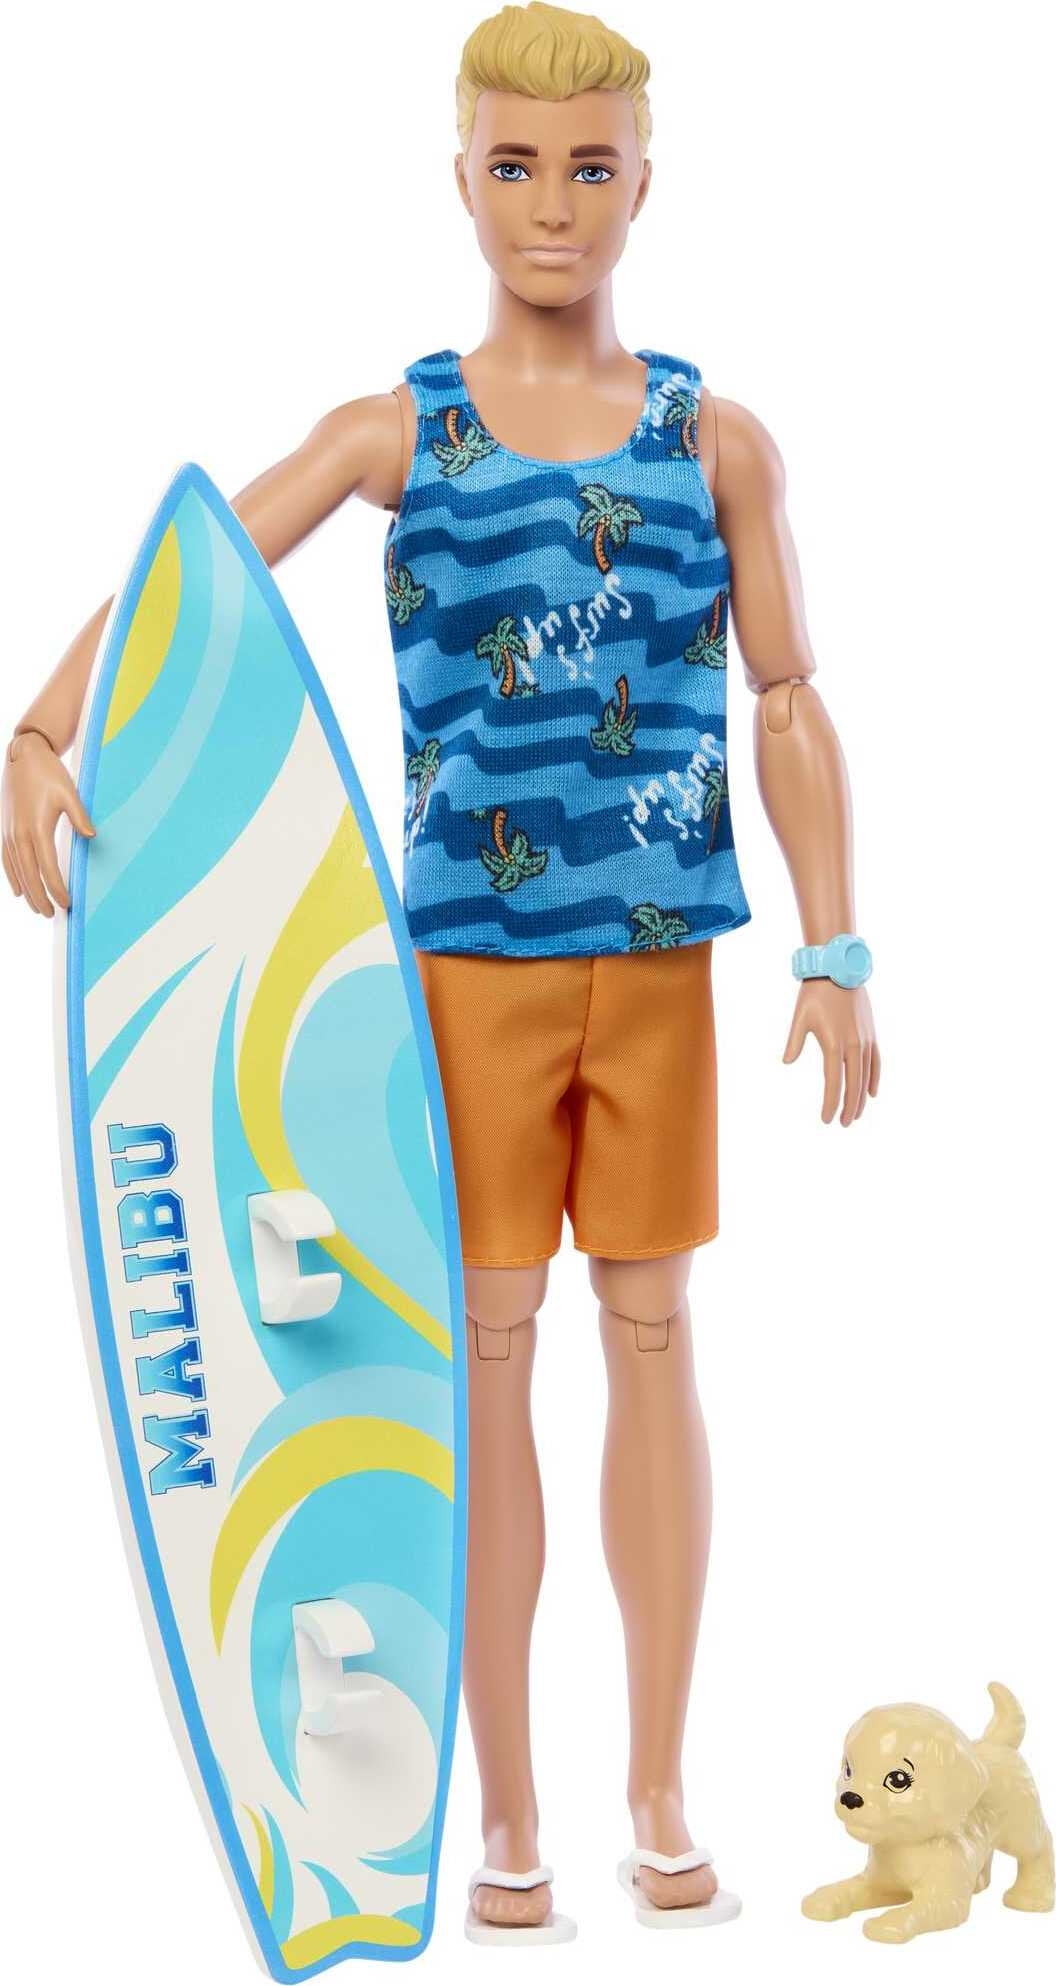 Ken Doll with Surfboard, Poseable Blonde Barbie Ken Beach Doll (Assembled  product height: 12 in)